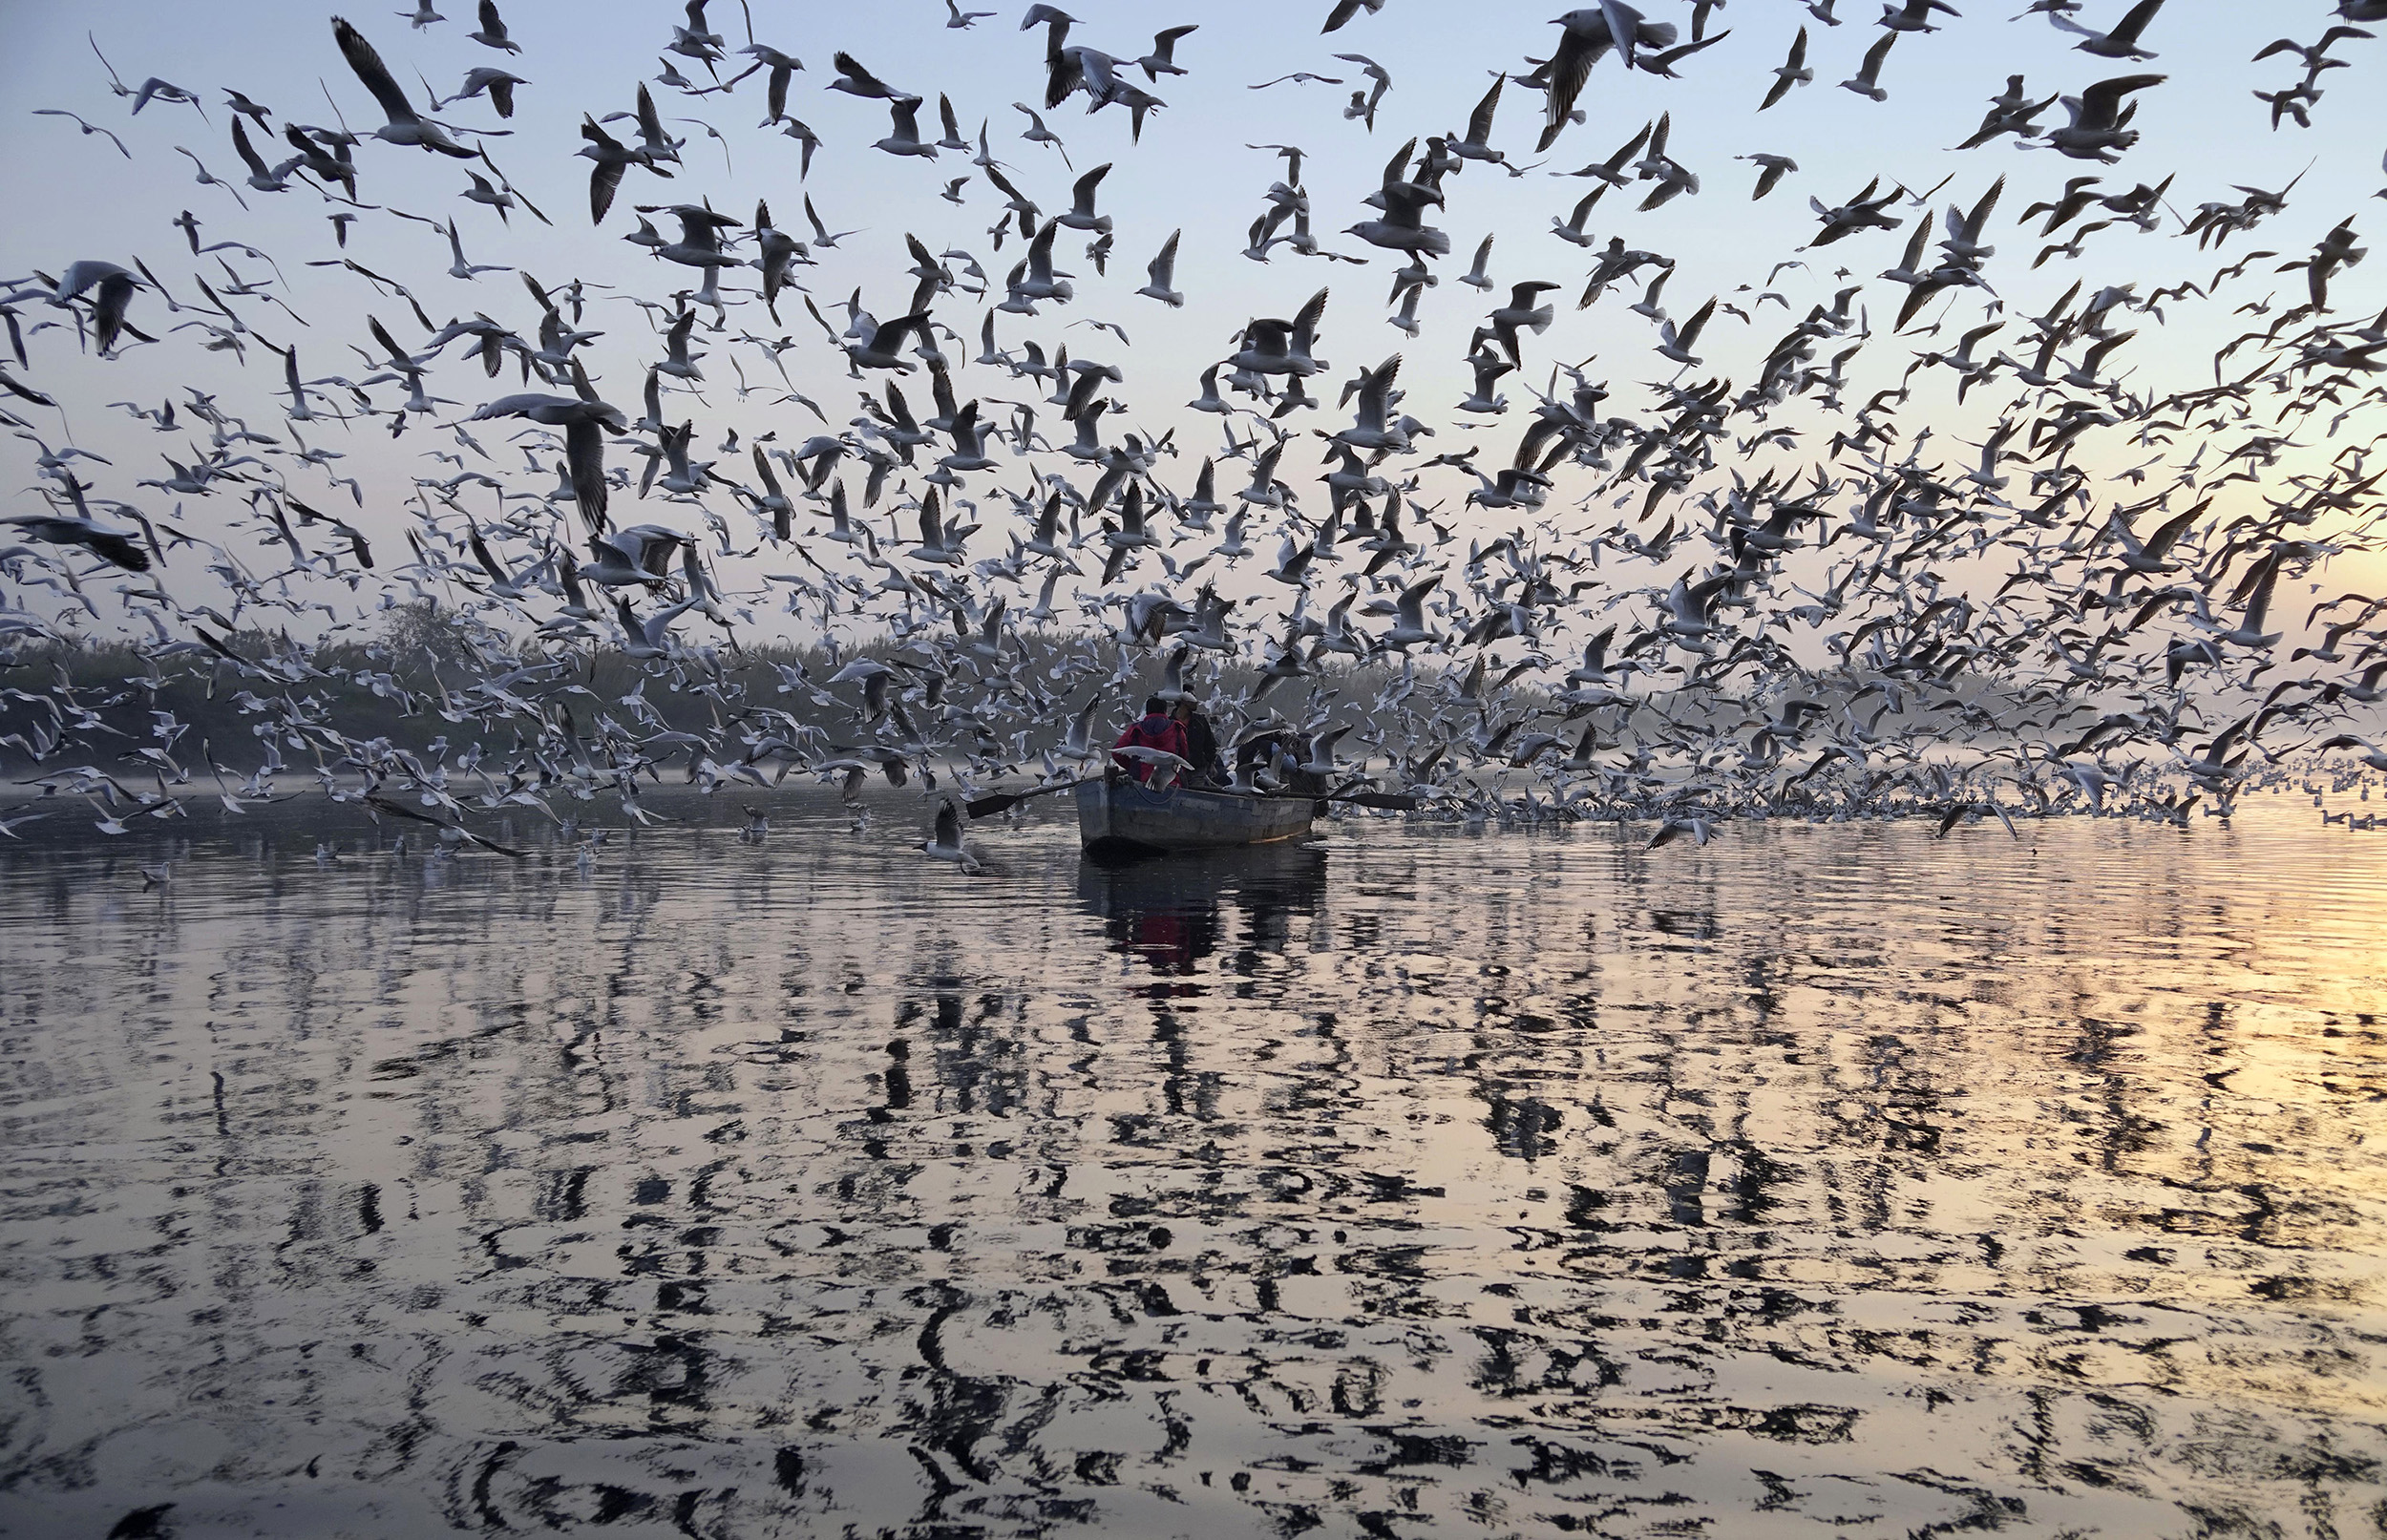 The Yamuna, one of the holiest rivers in India has recently gained popularity as one of the most polluted too. But this hasn’t affected the annual migration of the seagulls from Siberia which lights up the banks of the river and attracts photo enthusiasts who come to cherish this sight.